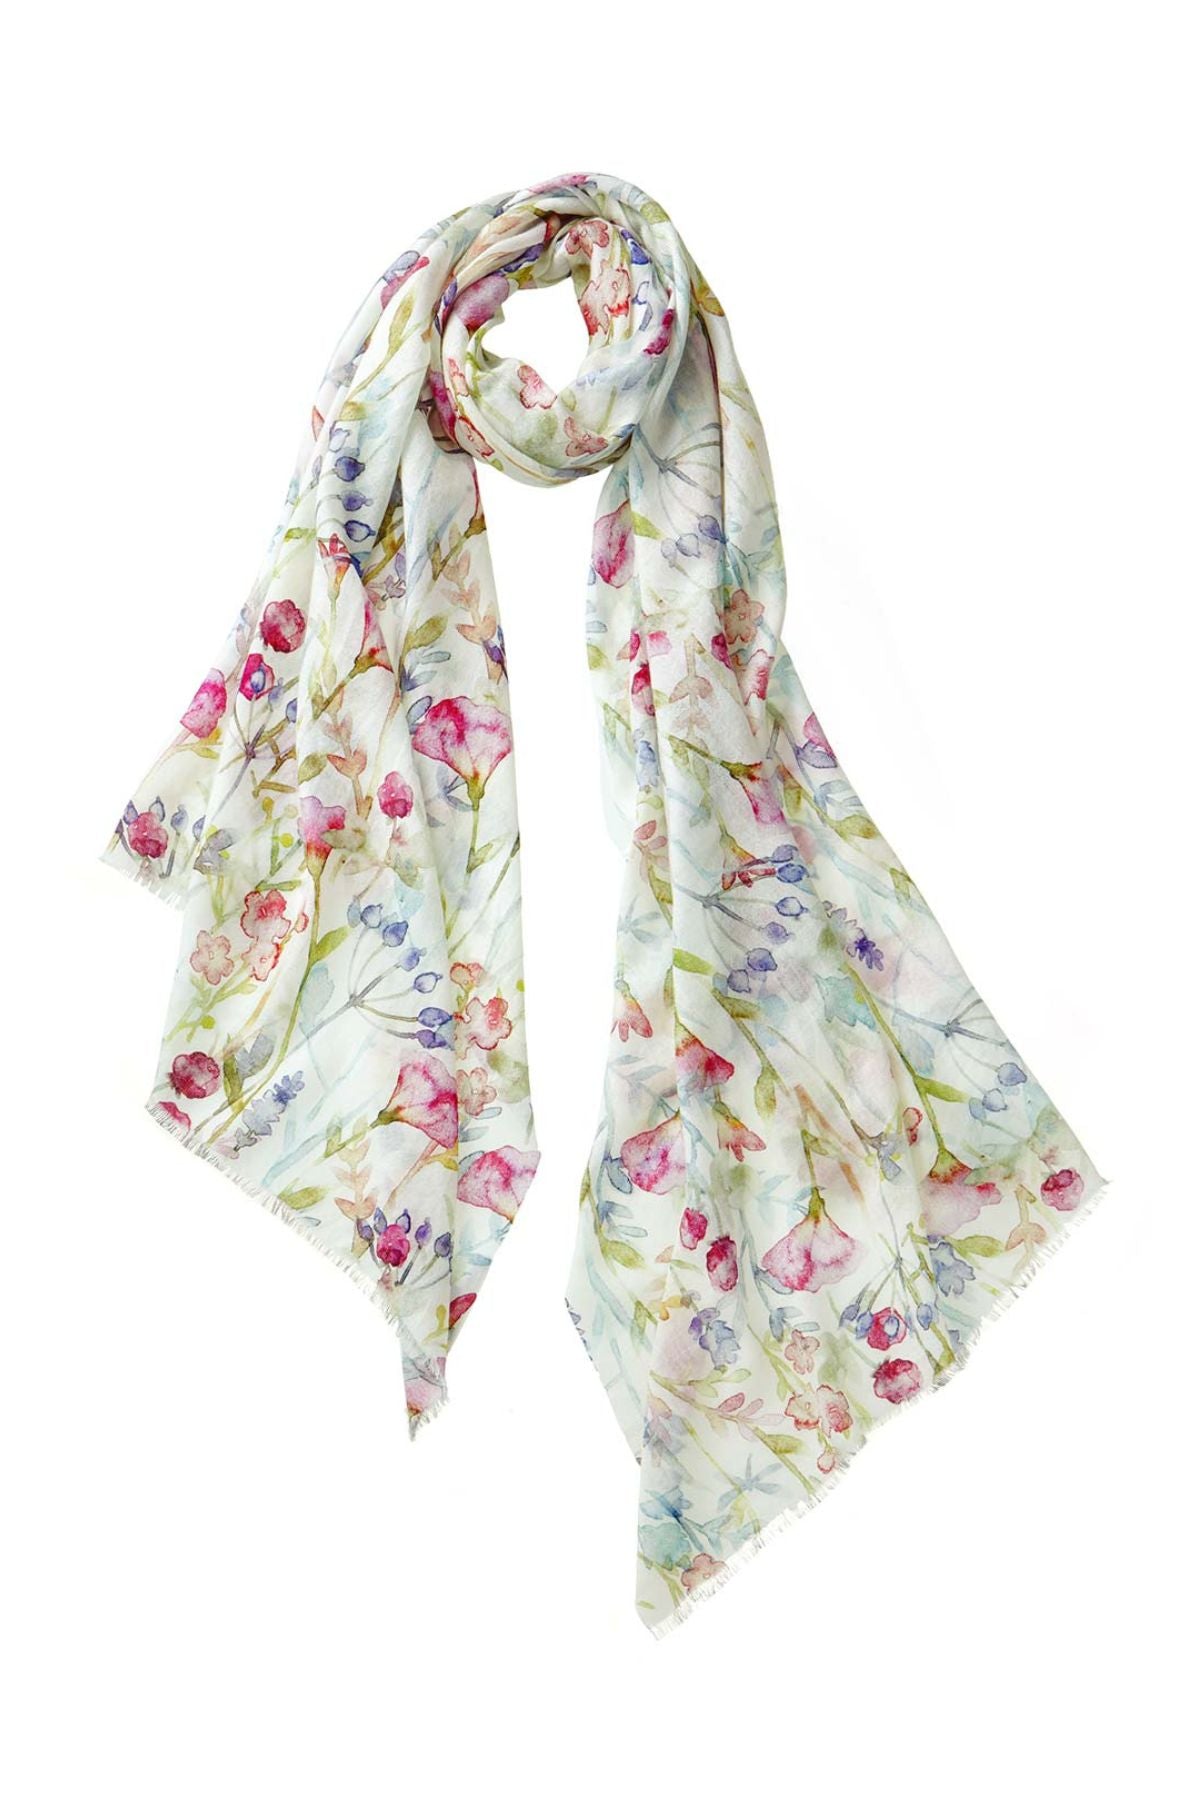 Watercolor flowers scarf in ivory